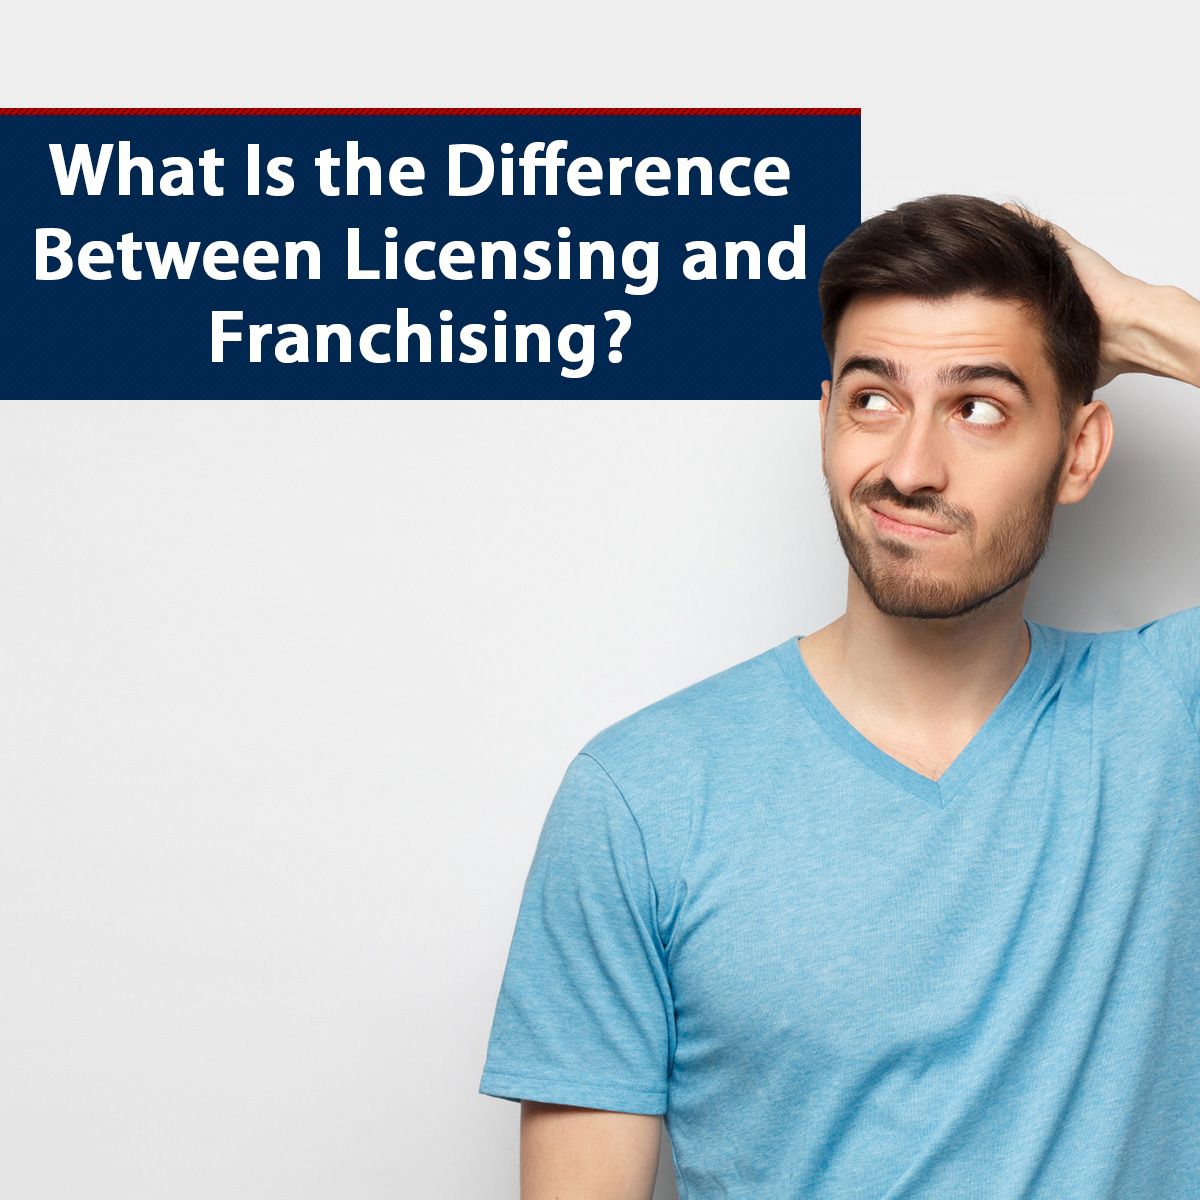 What Is the Difference Between Licensing and Franchising?